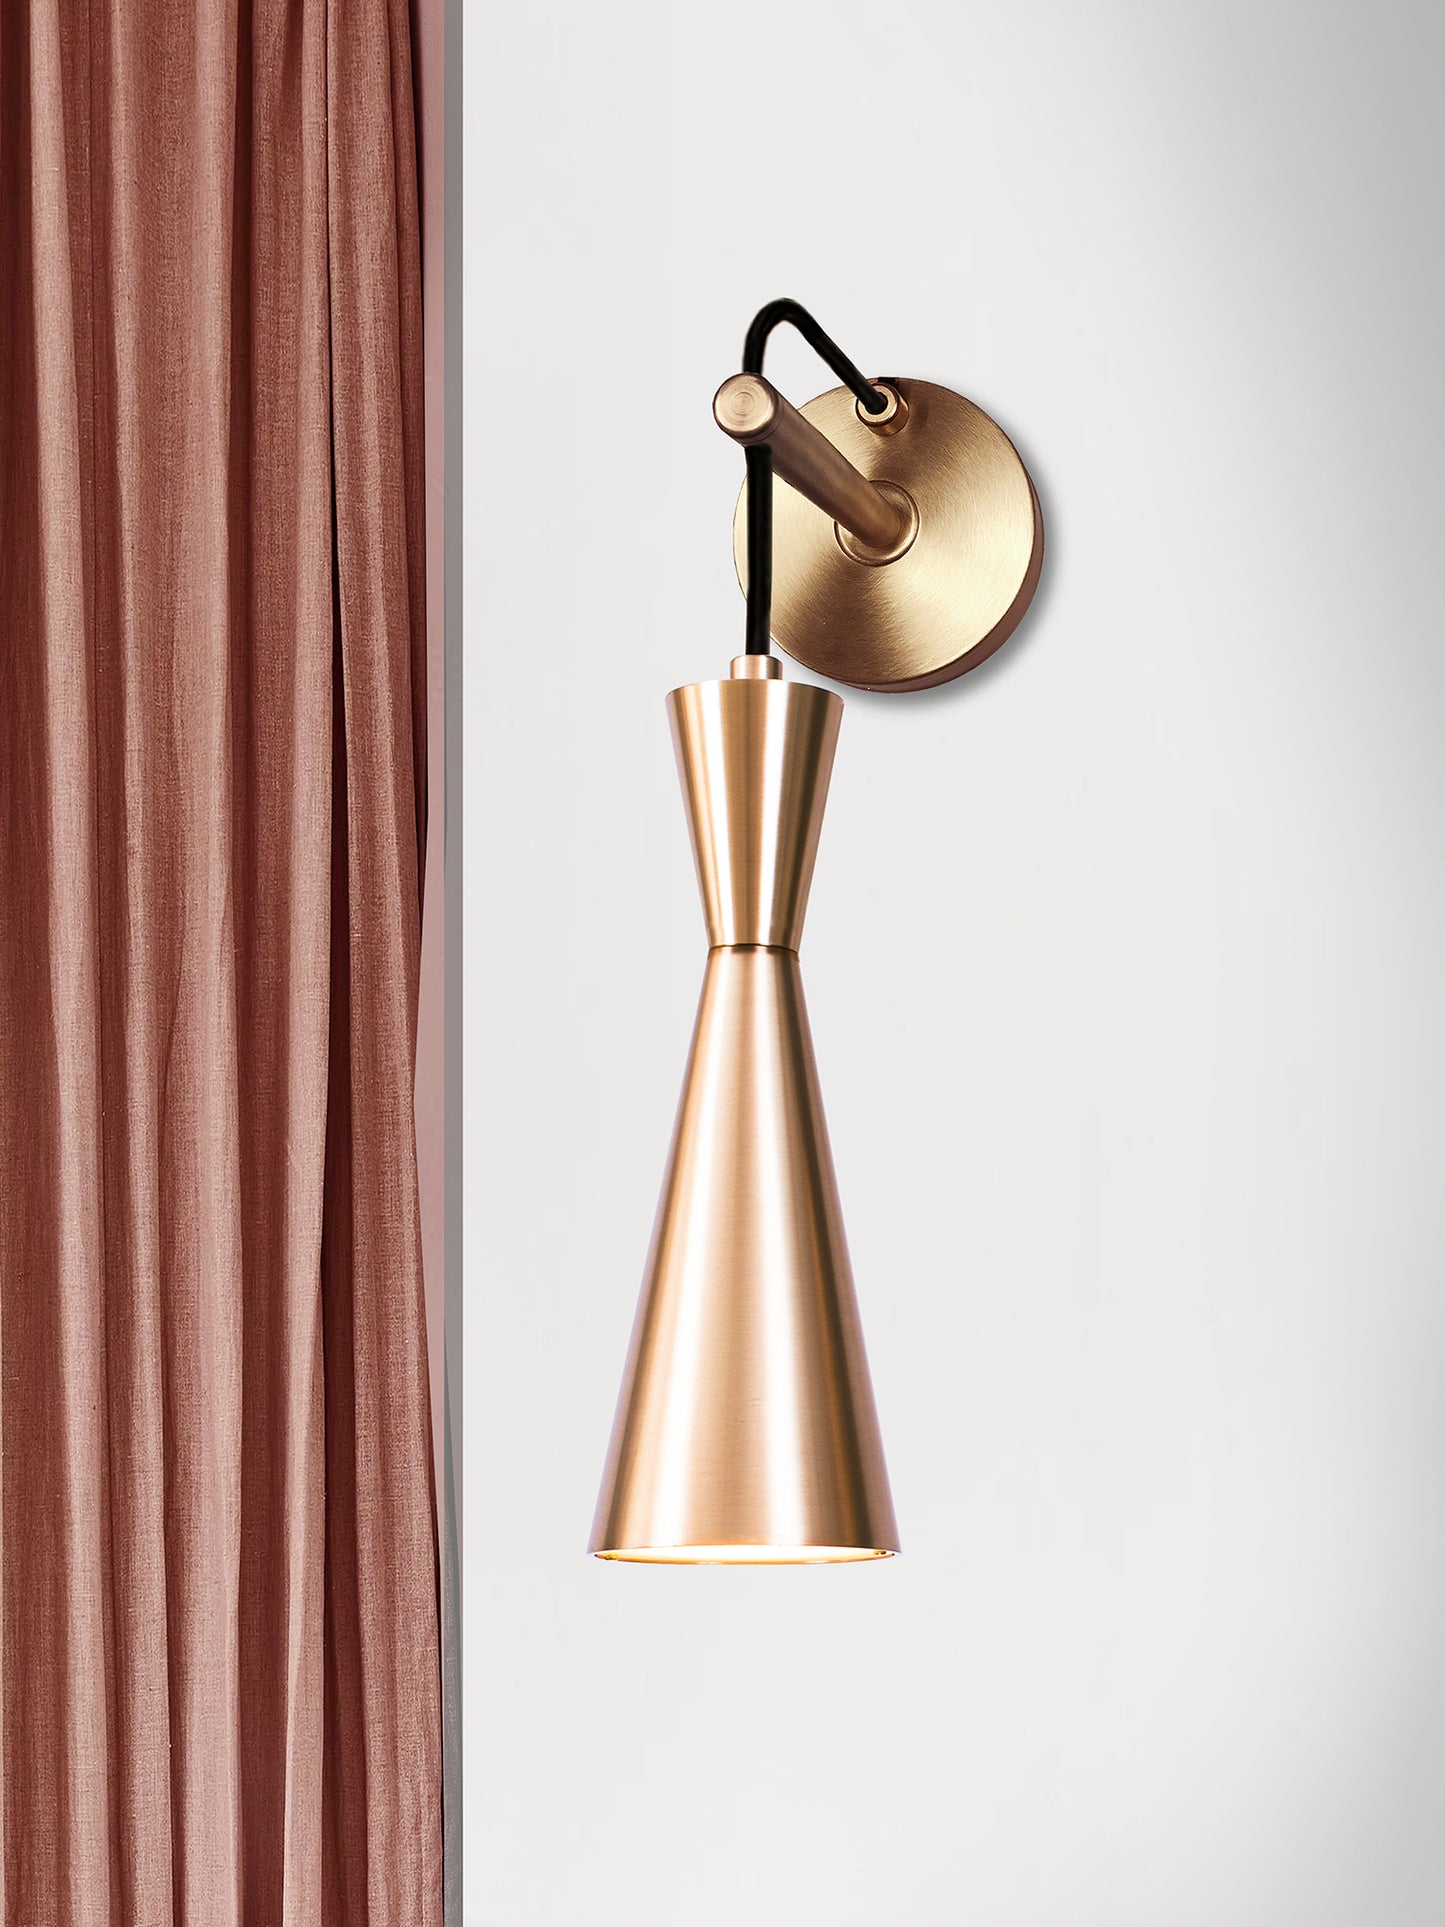 Cone Wall Light, on wall in setting.